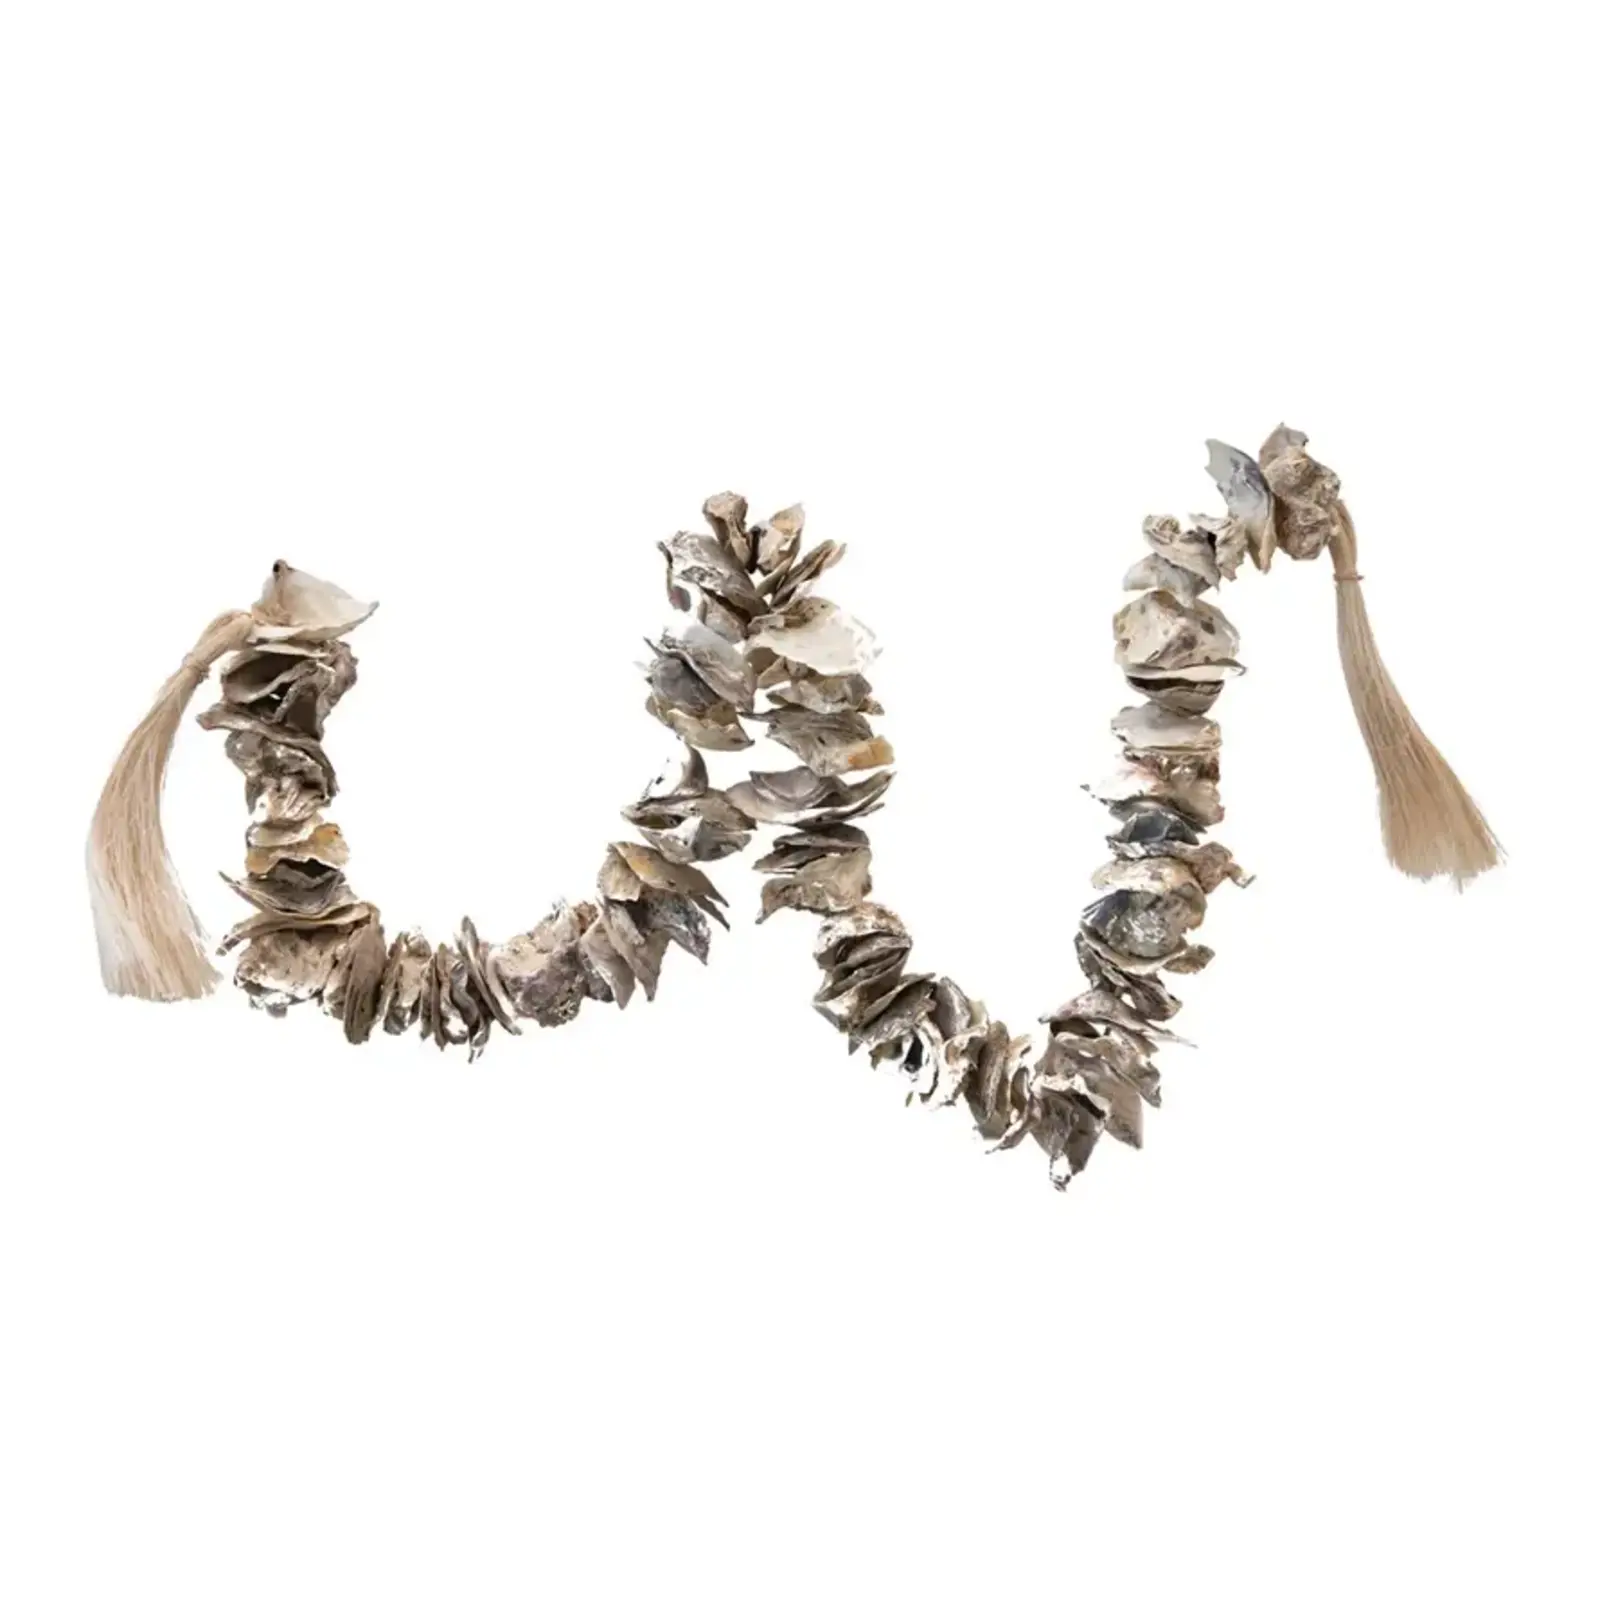 Creative Co-Op 49" Oyster Shell Garland with Tassels   DF4447 loading=